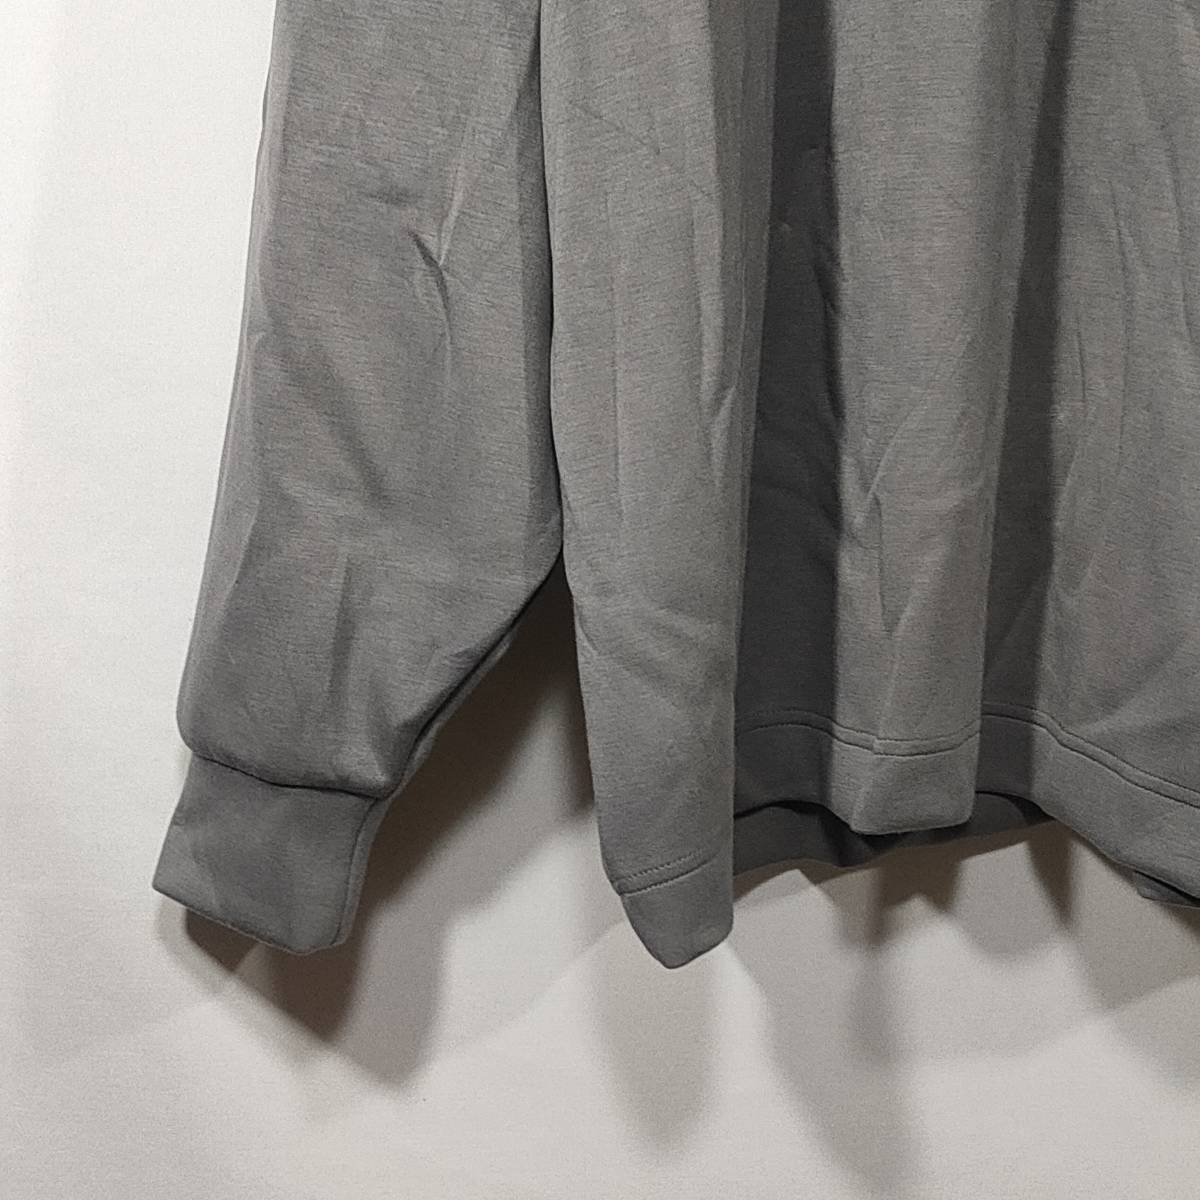  Hare HARE sweatshirt pull over cut and sewn crew neck big Silhouette long sleeve F gray men's used /CG